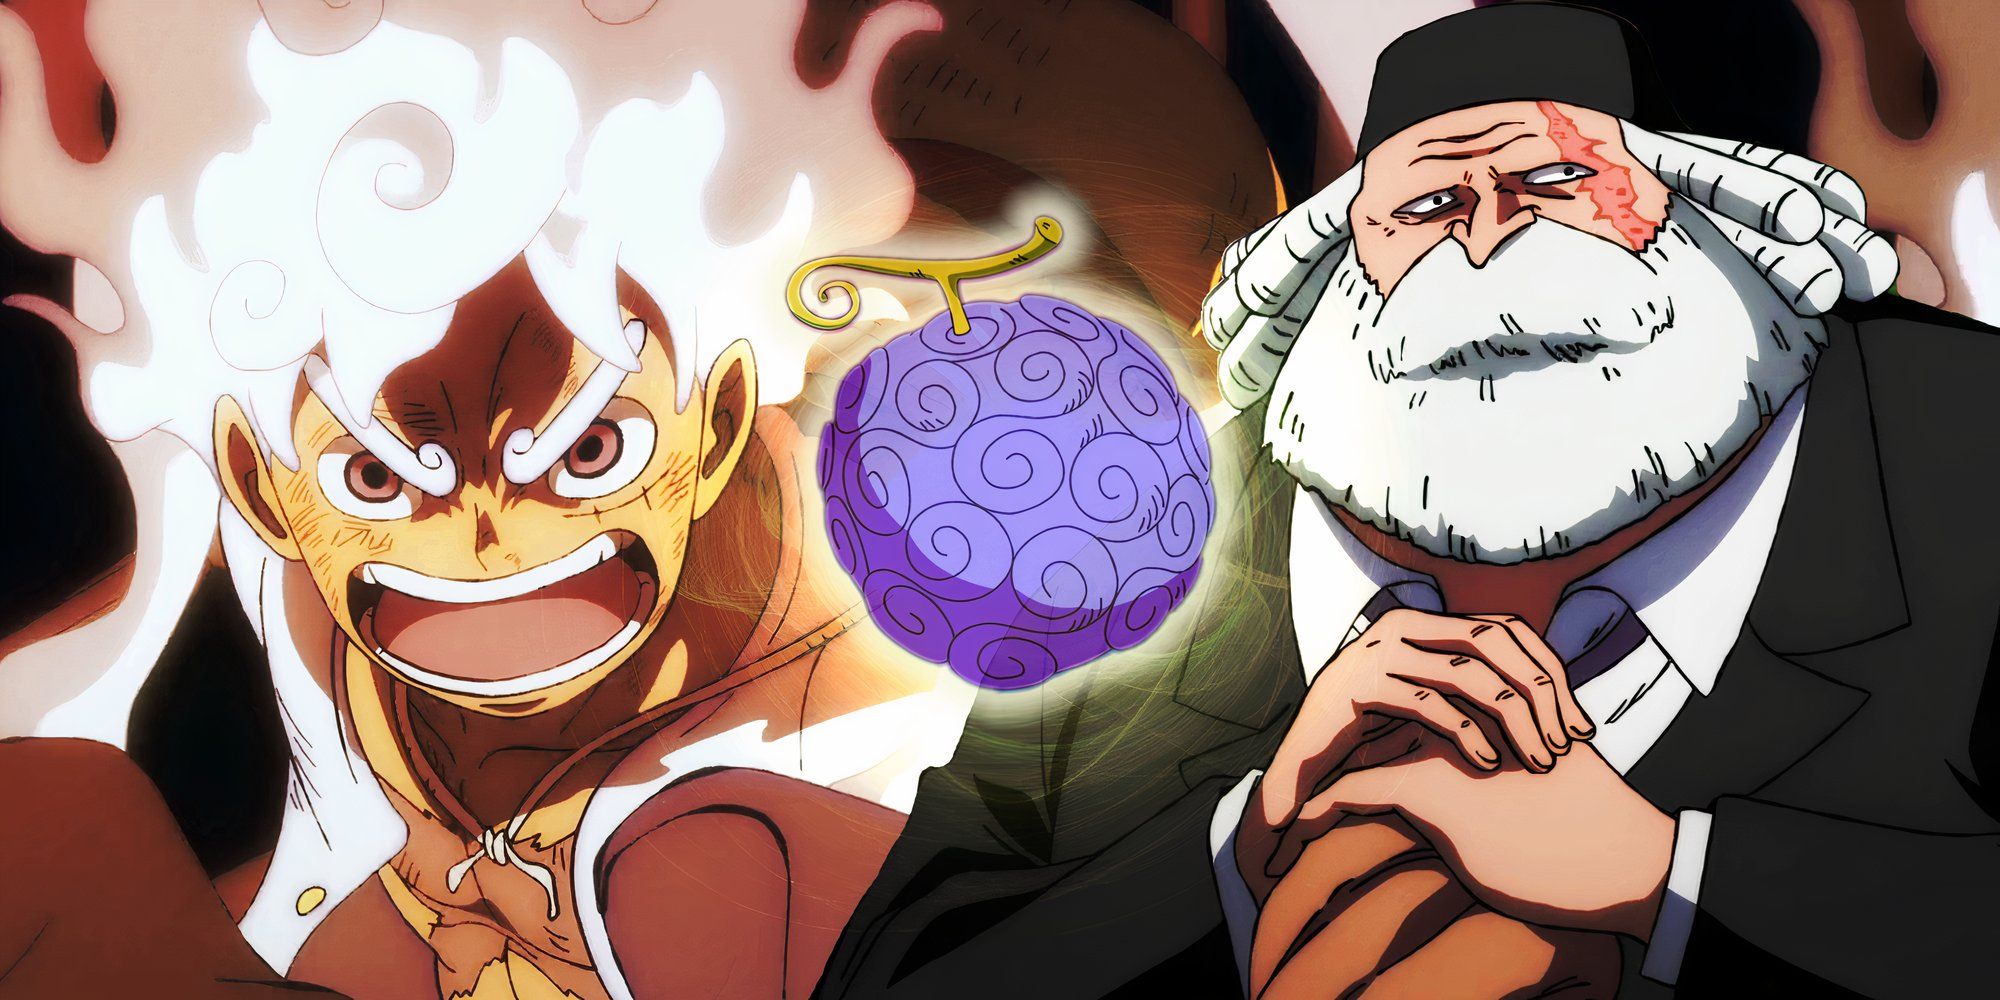 the nika devil fruit from one piece featured in the center with Luffy in Gear Five looking angry to the left and saint saturn to the right